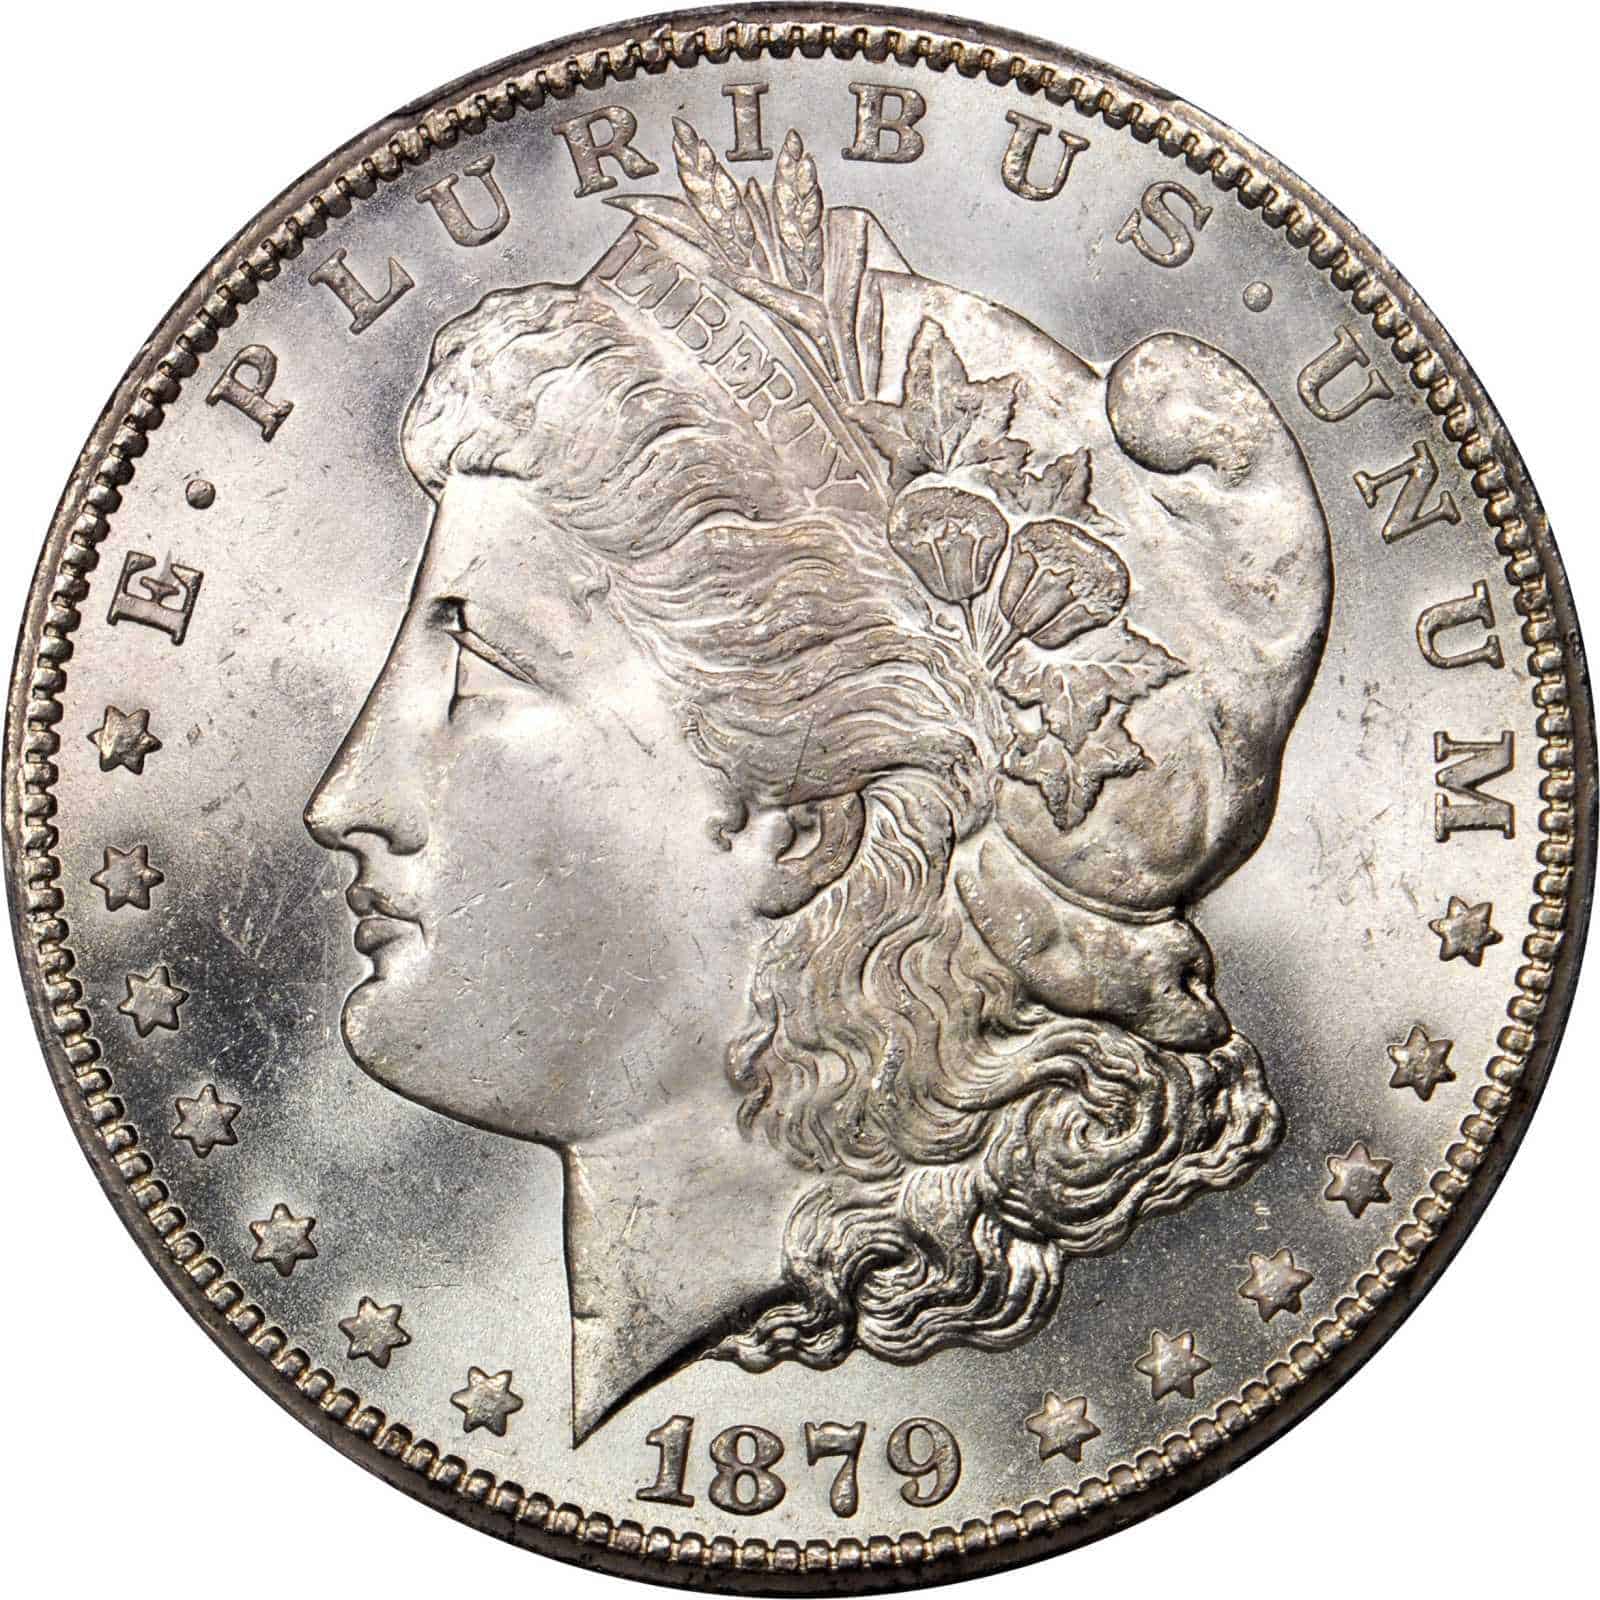 Obverse Features